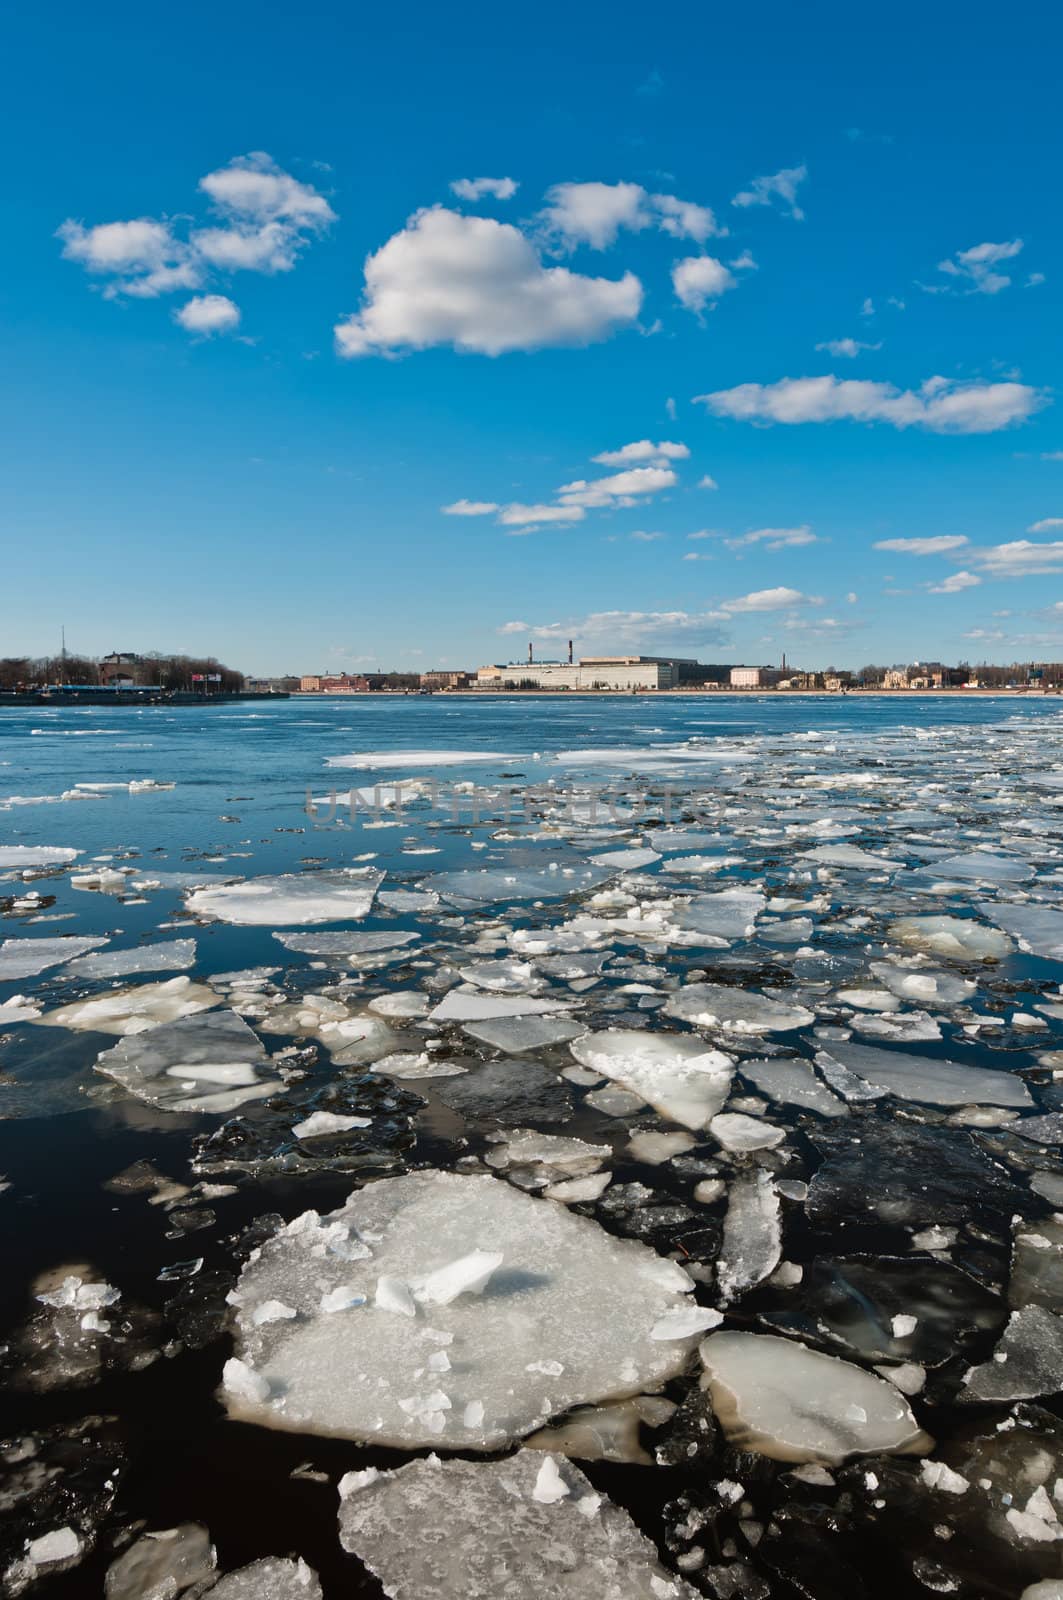 Small and broken ice pieces floating on river in city